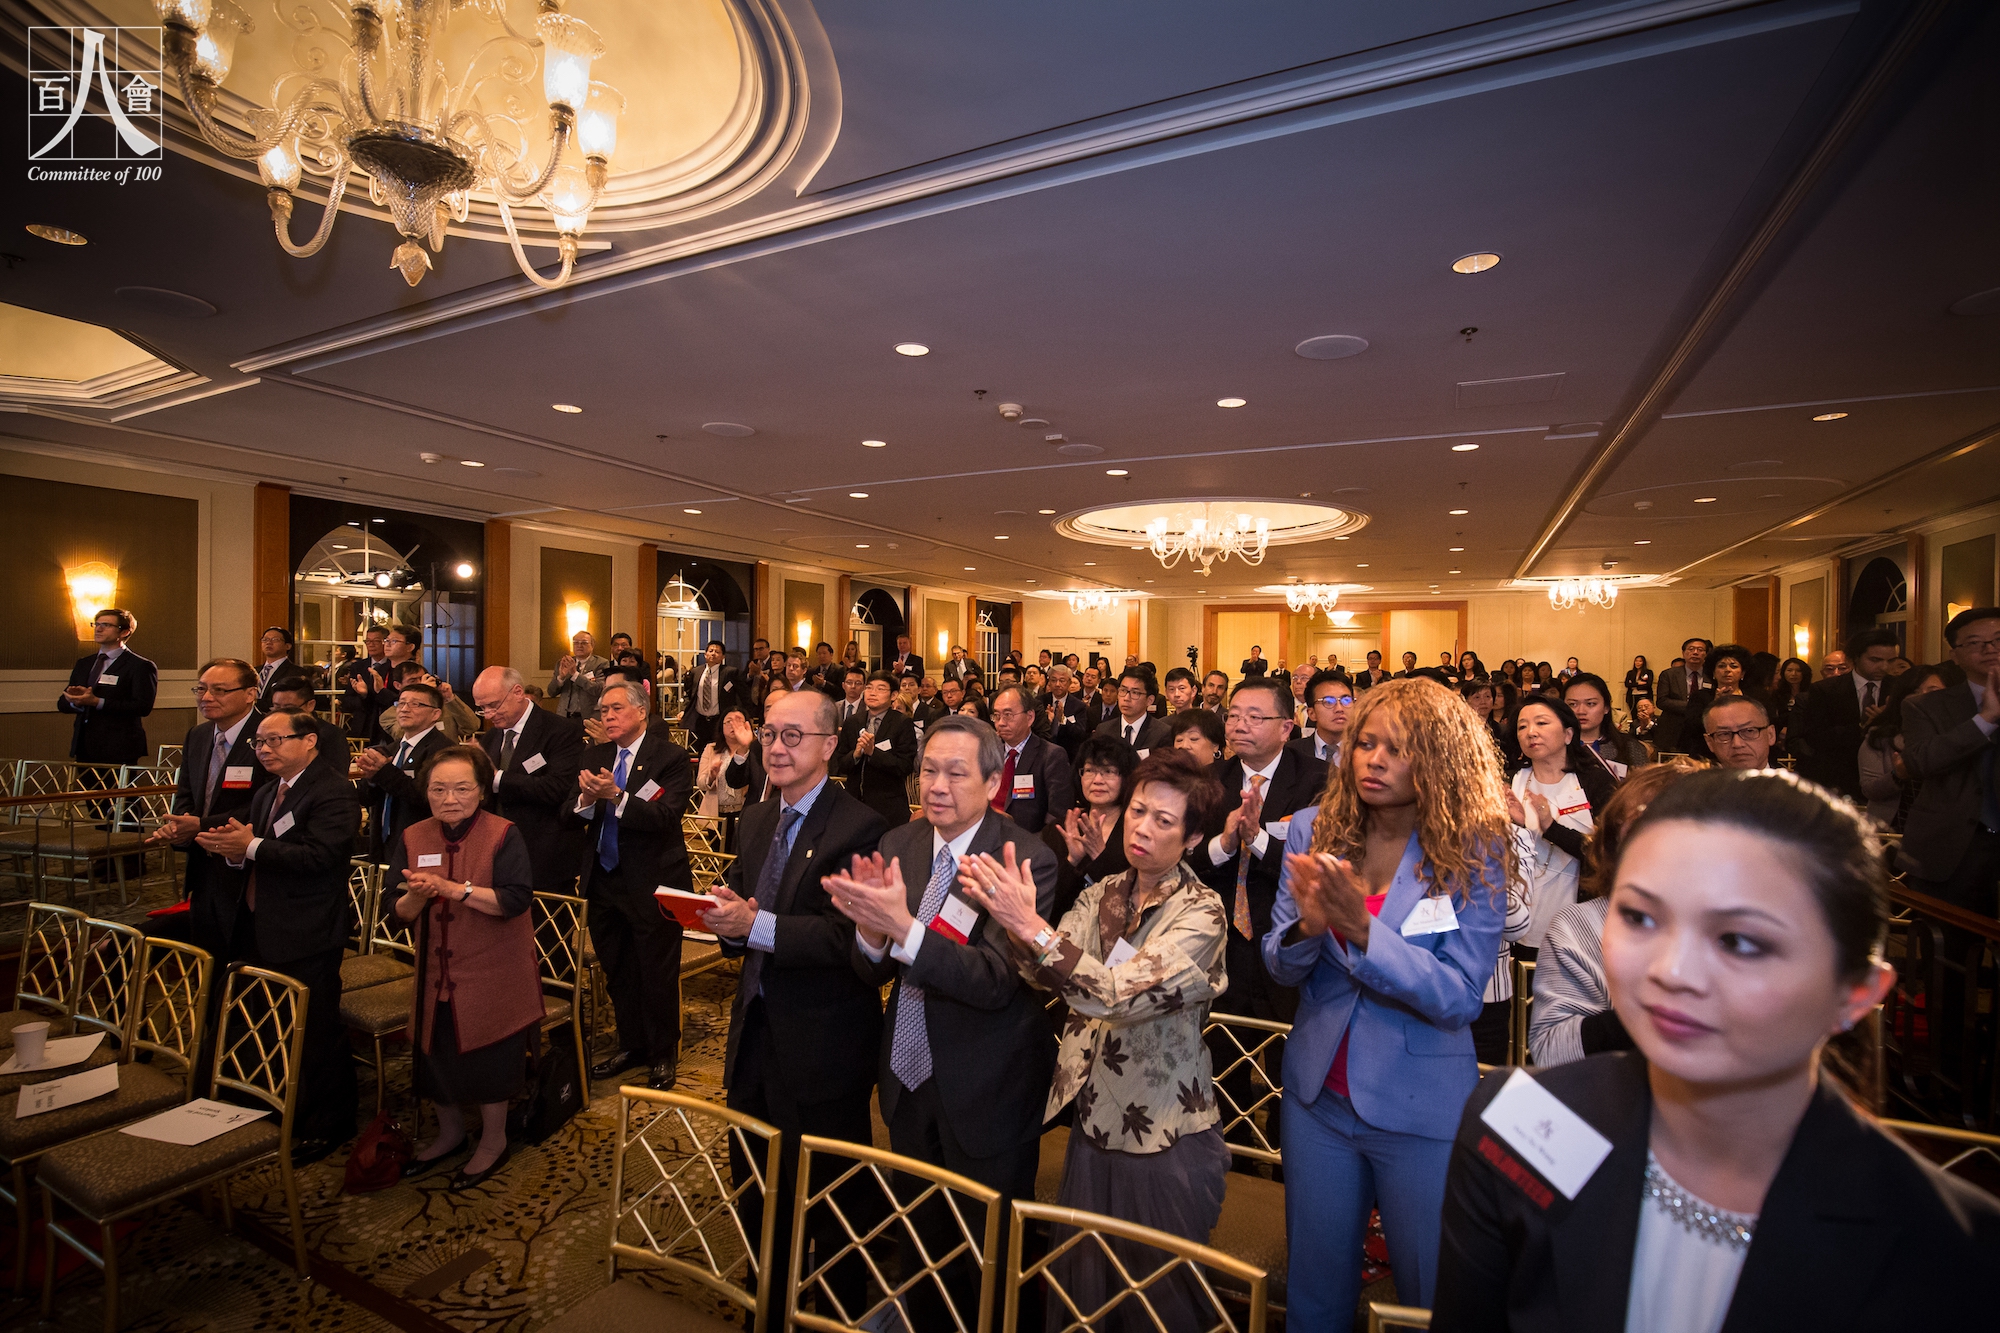 Committee of 100 to address U.S.-China relations and issues of Chinese-Americans